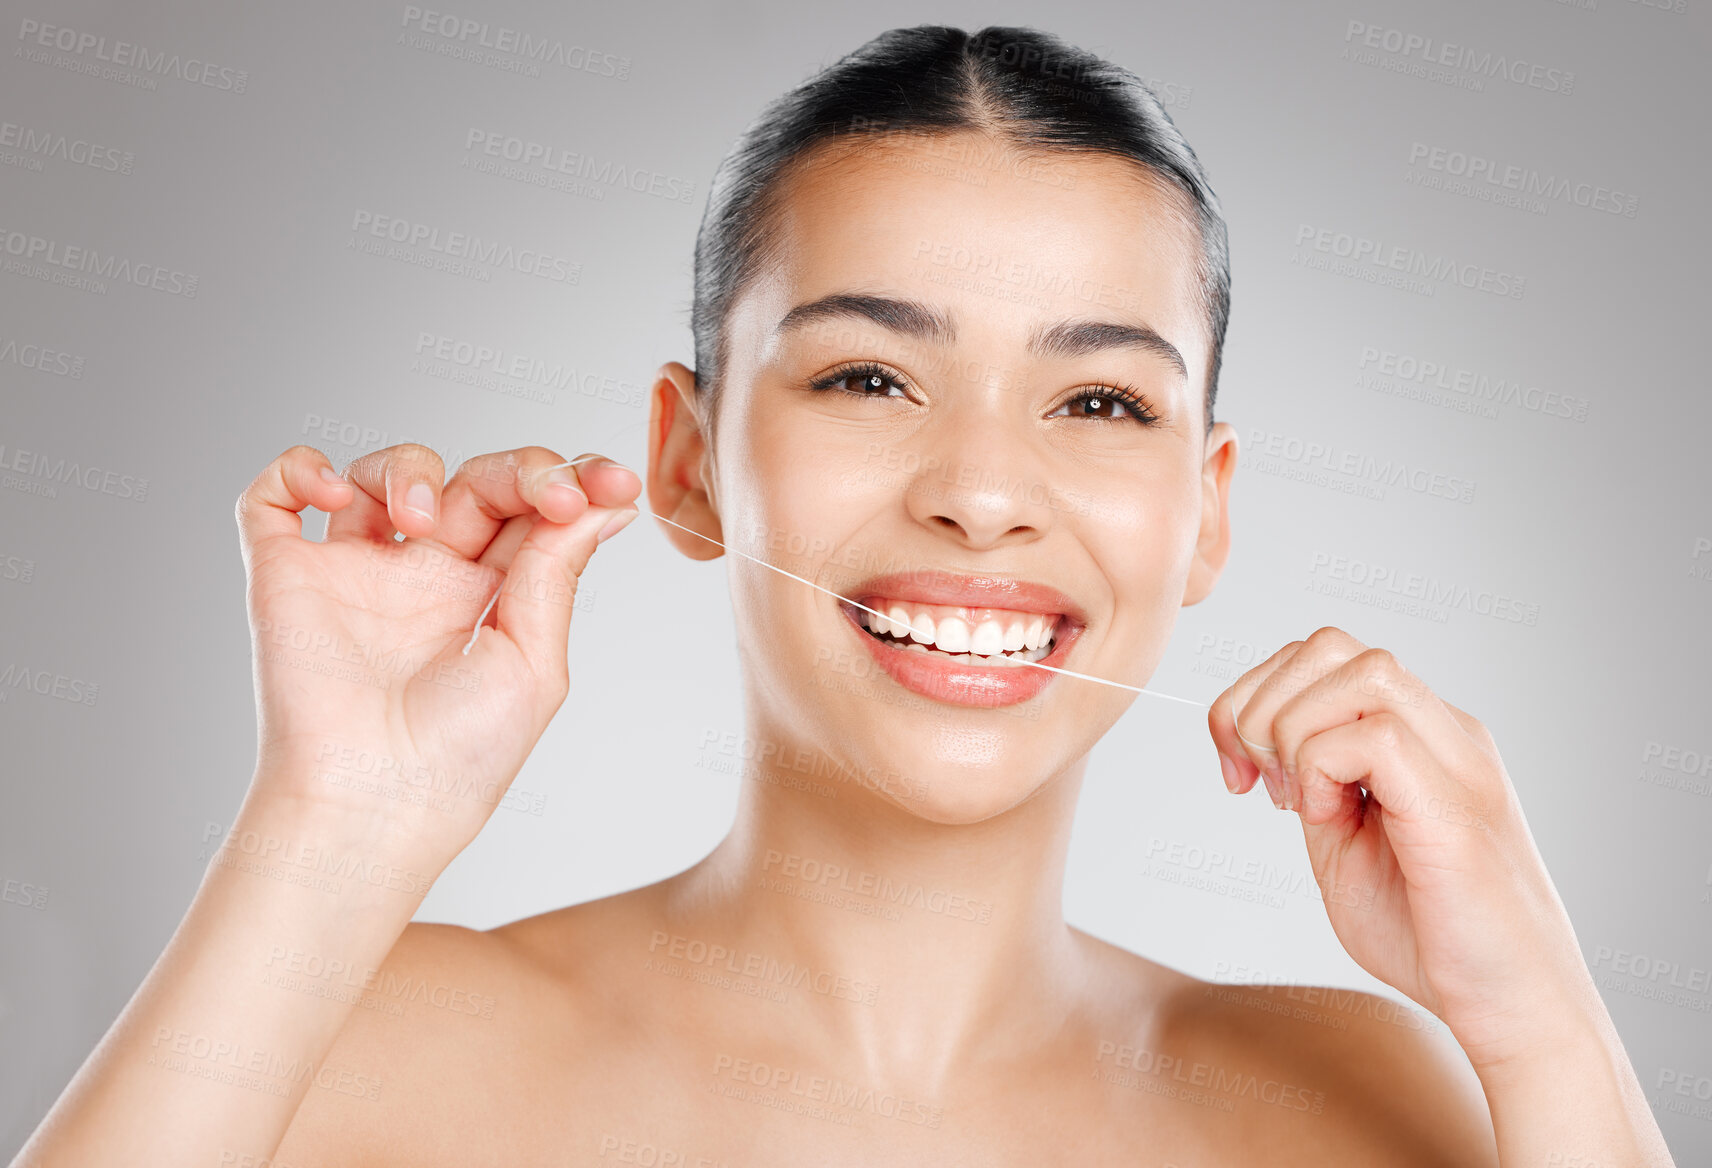 Buy stock photo Studio shot of an attractive young woman flossing her teeth against a grey background